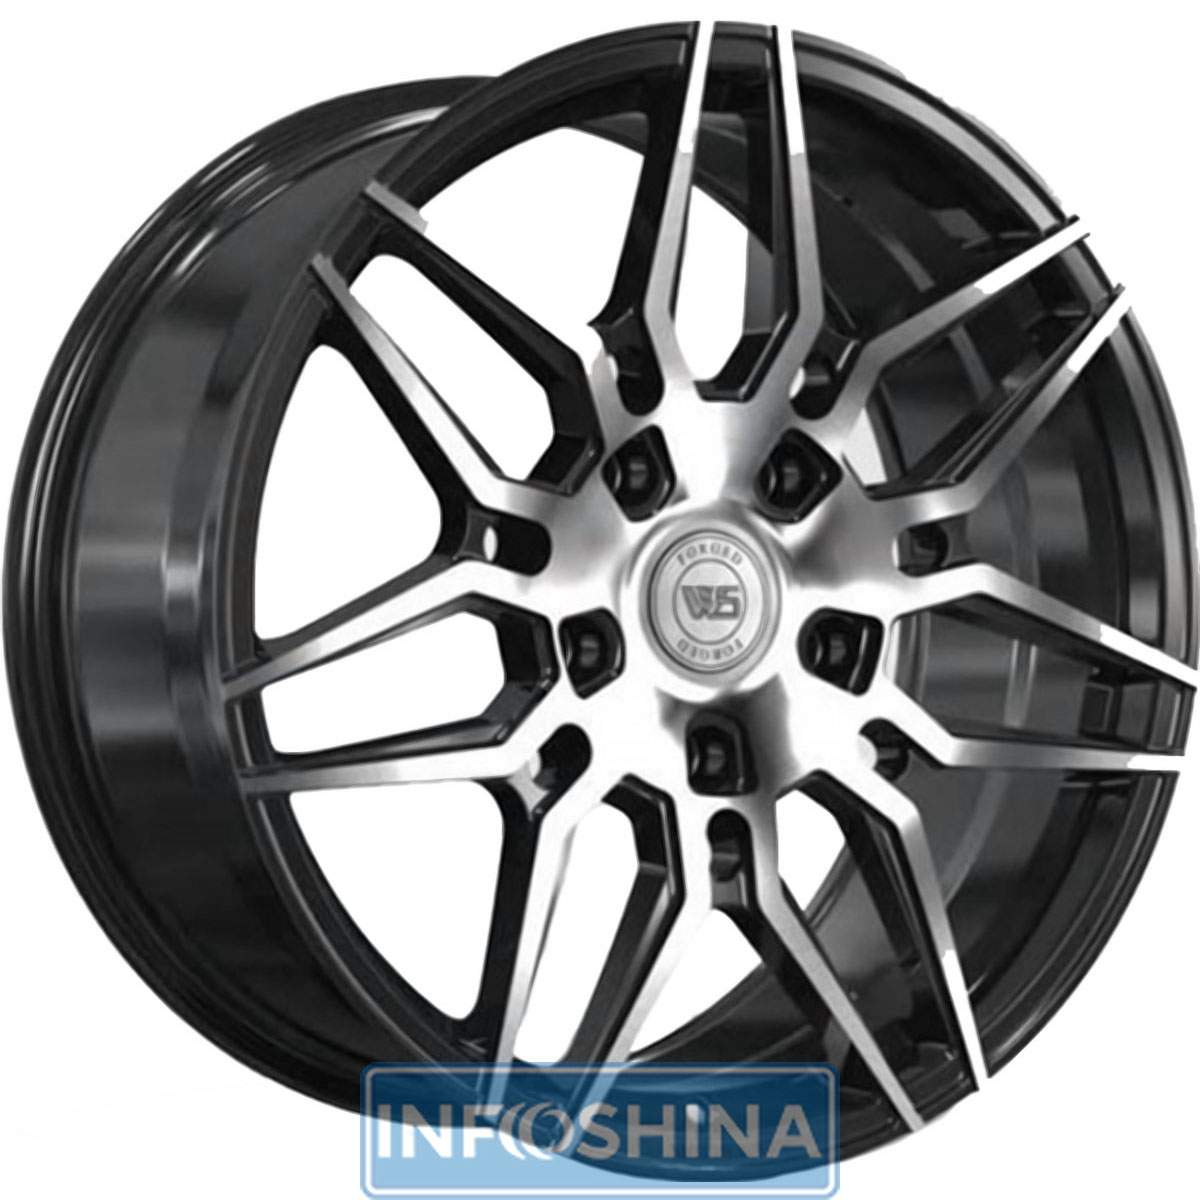 Купити диски WS Forged WS2110 Gloss Black With Machined Face R20 W9 PCD5x150 ET45 DIA110.1